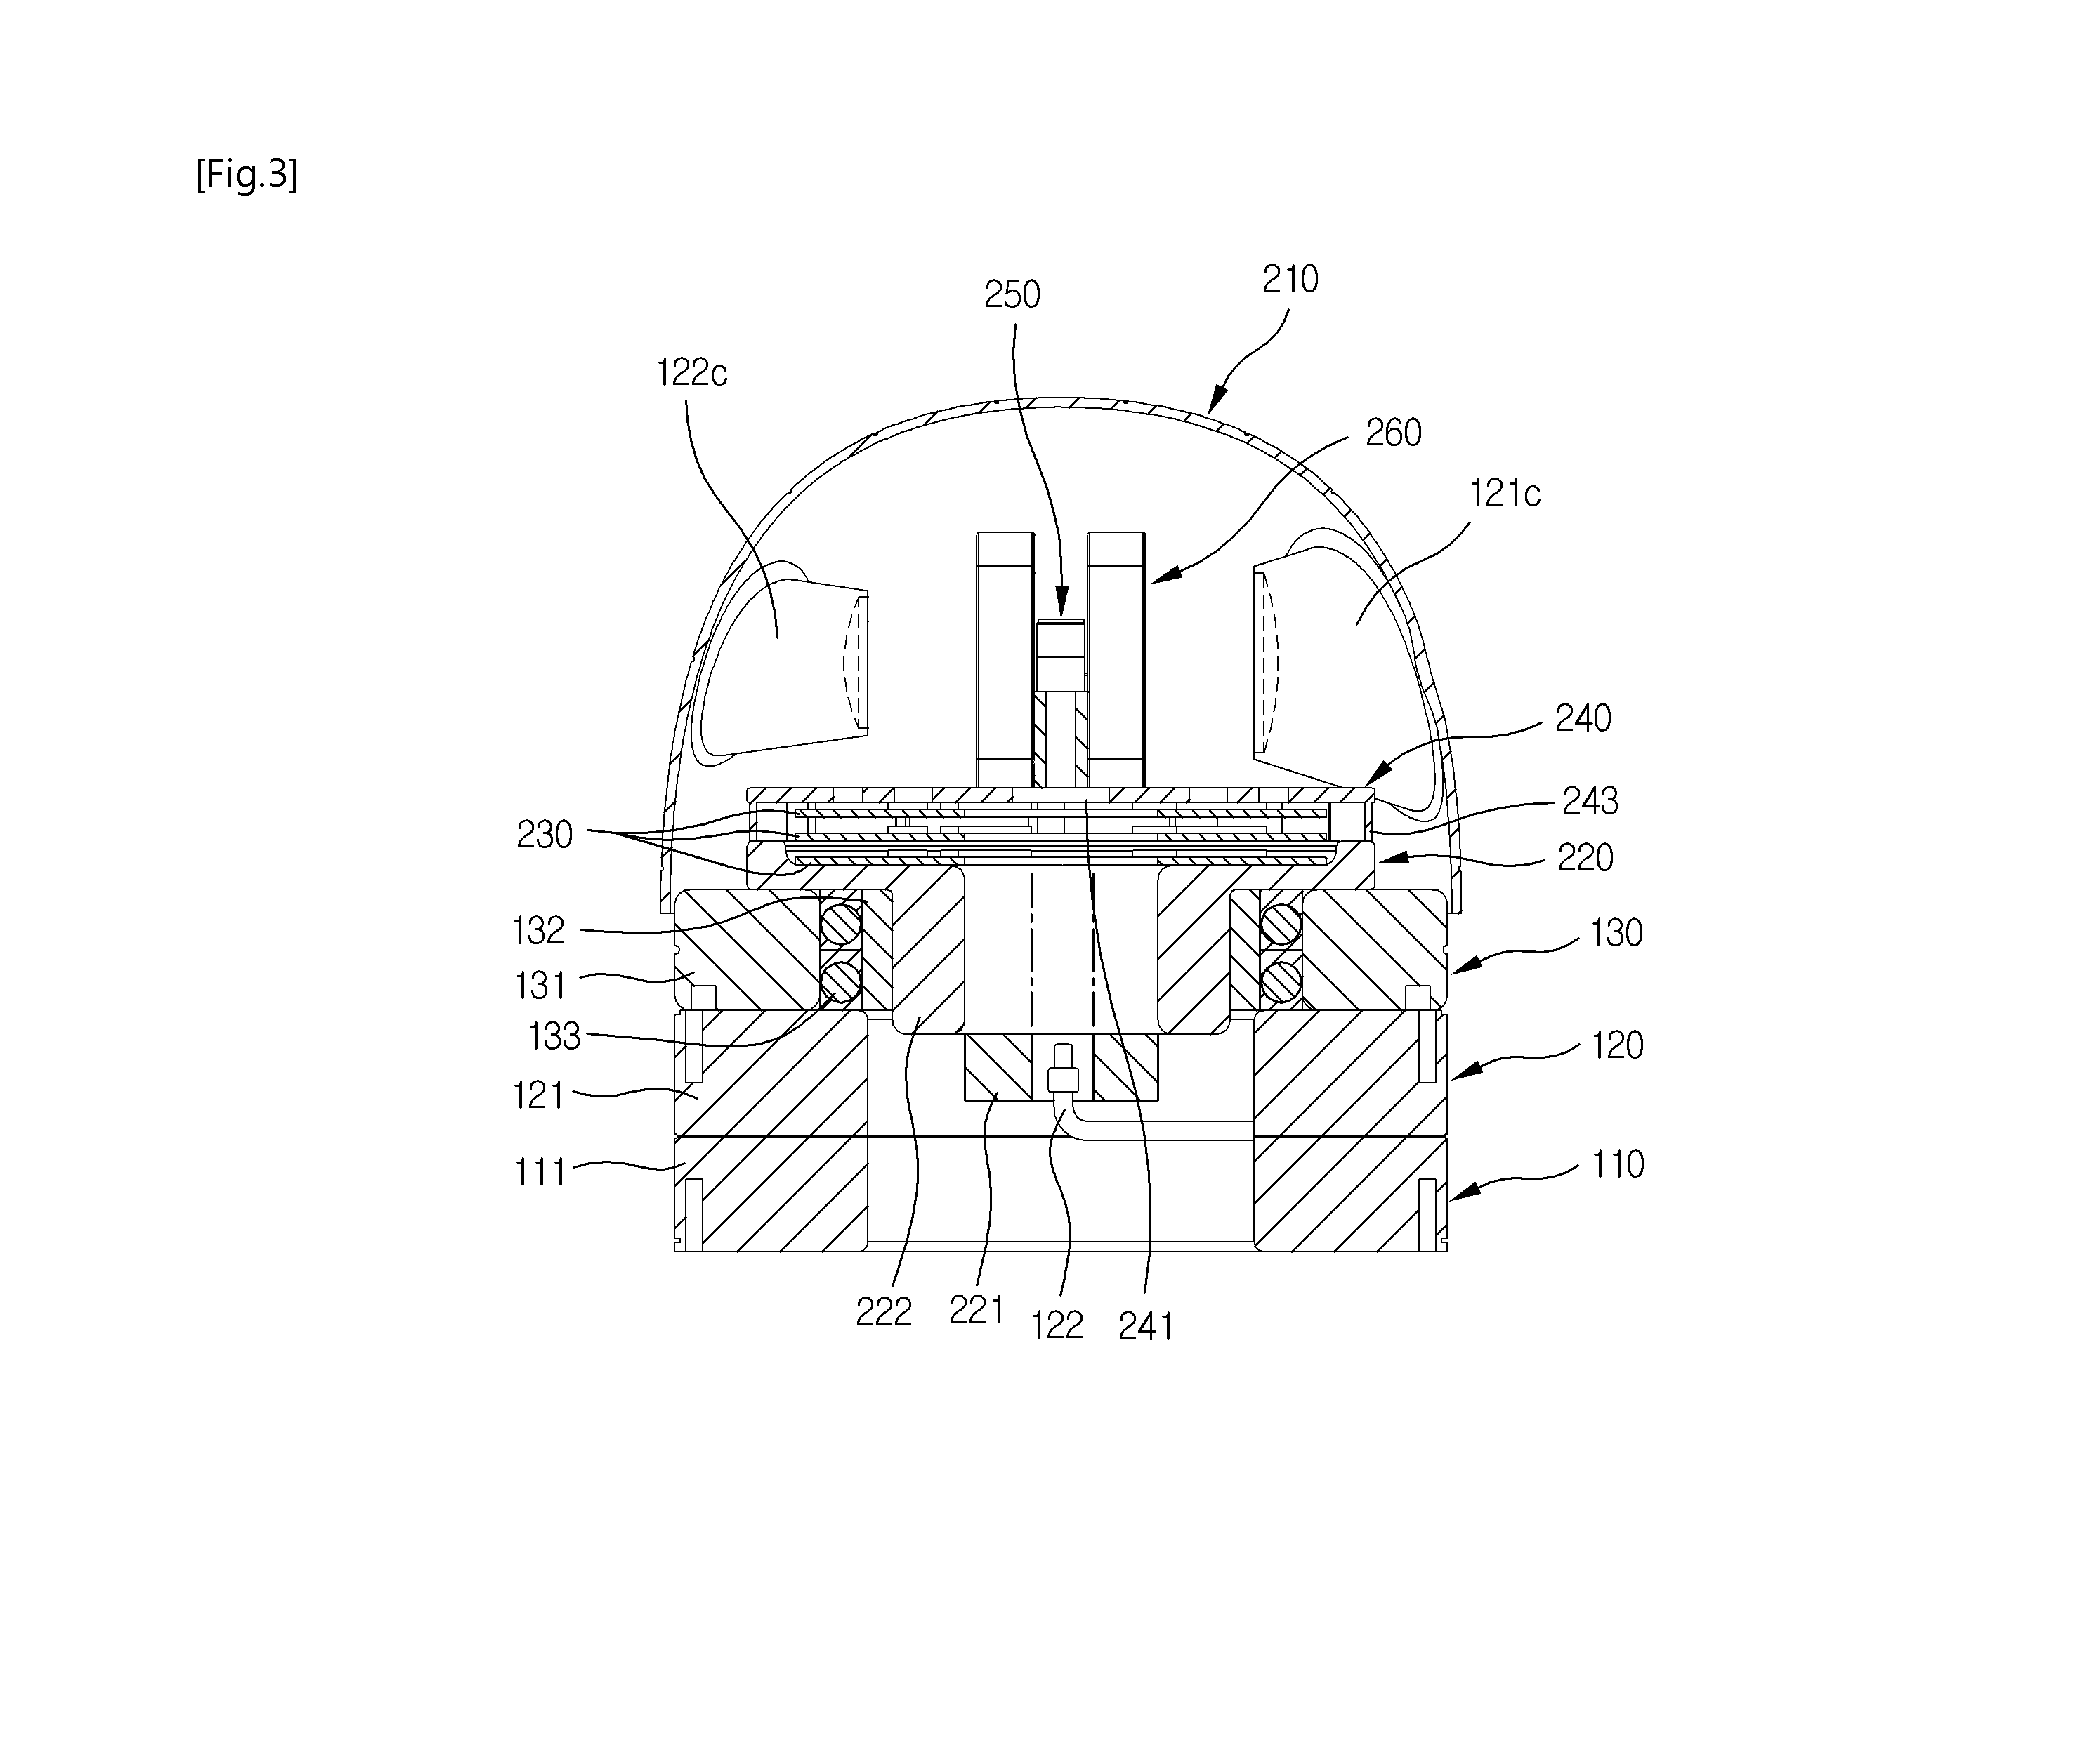 3D scanning system and method of obtaining 3D image